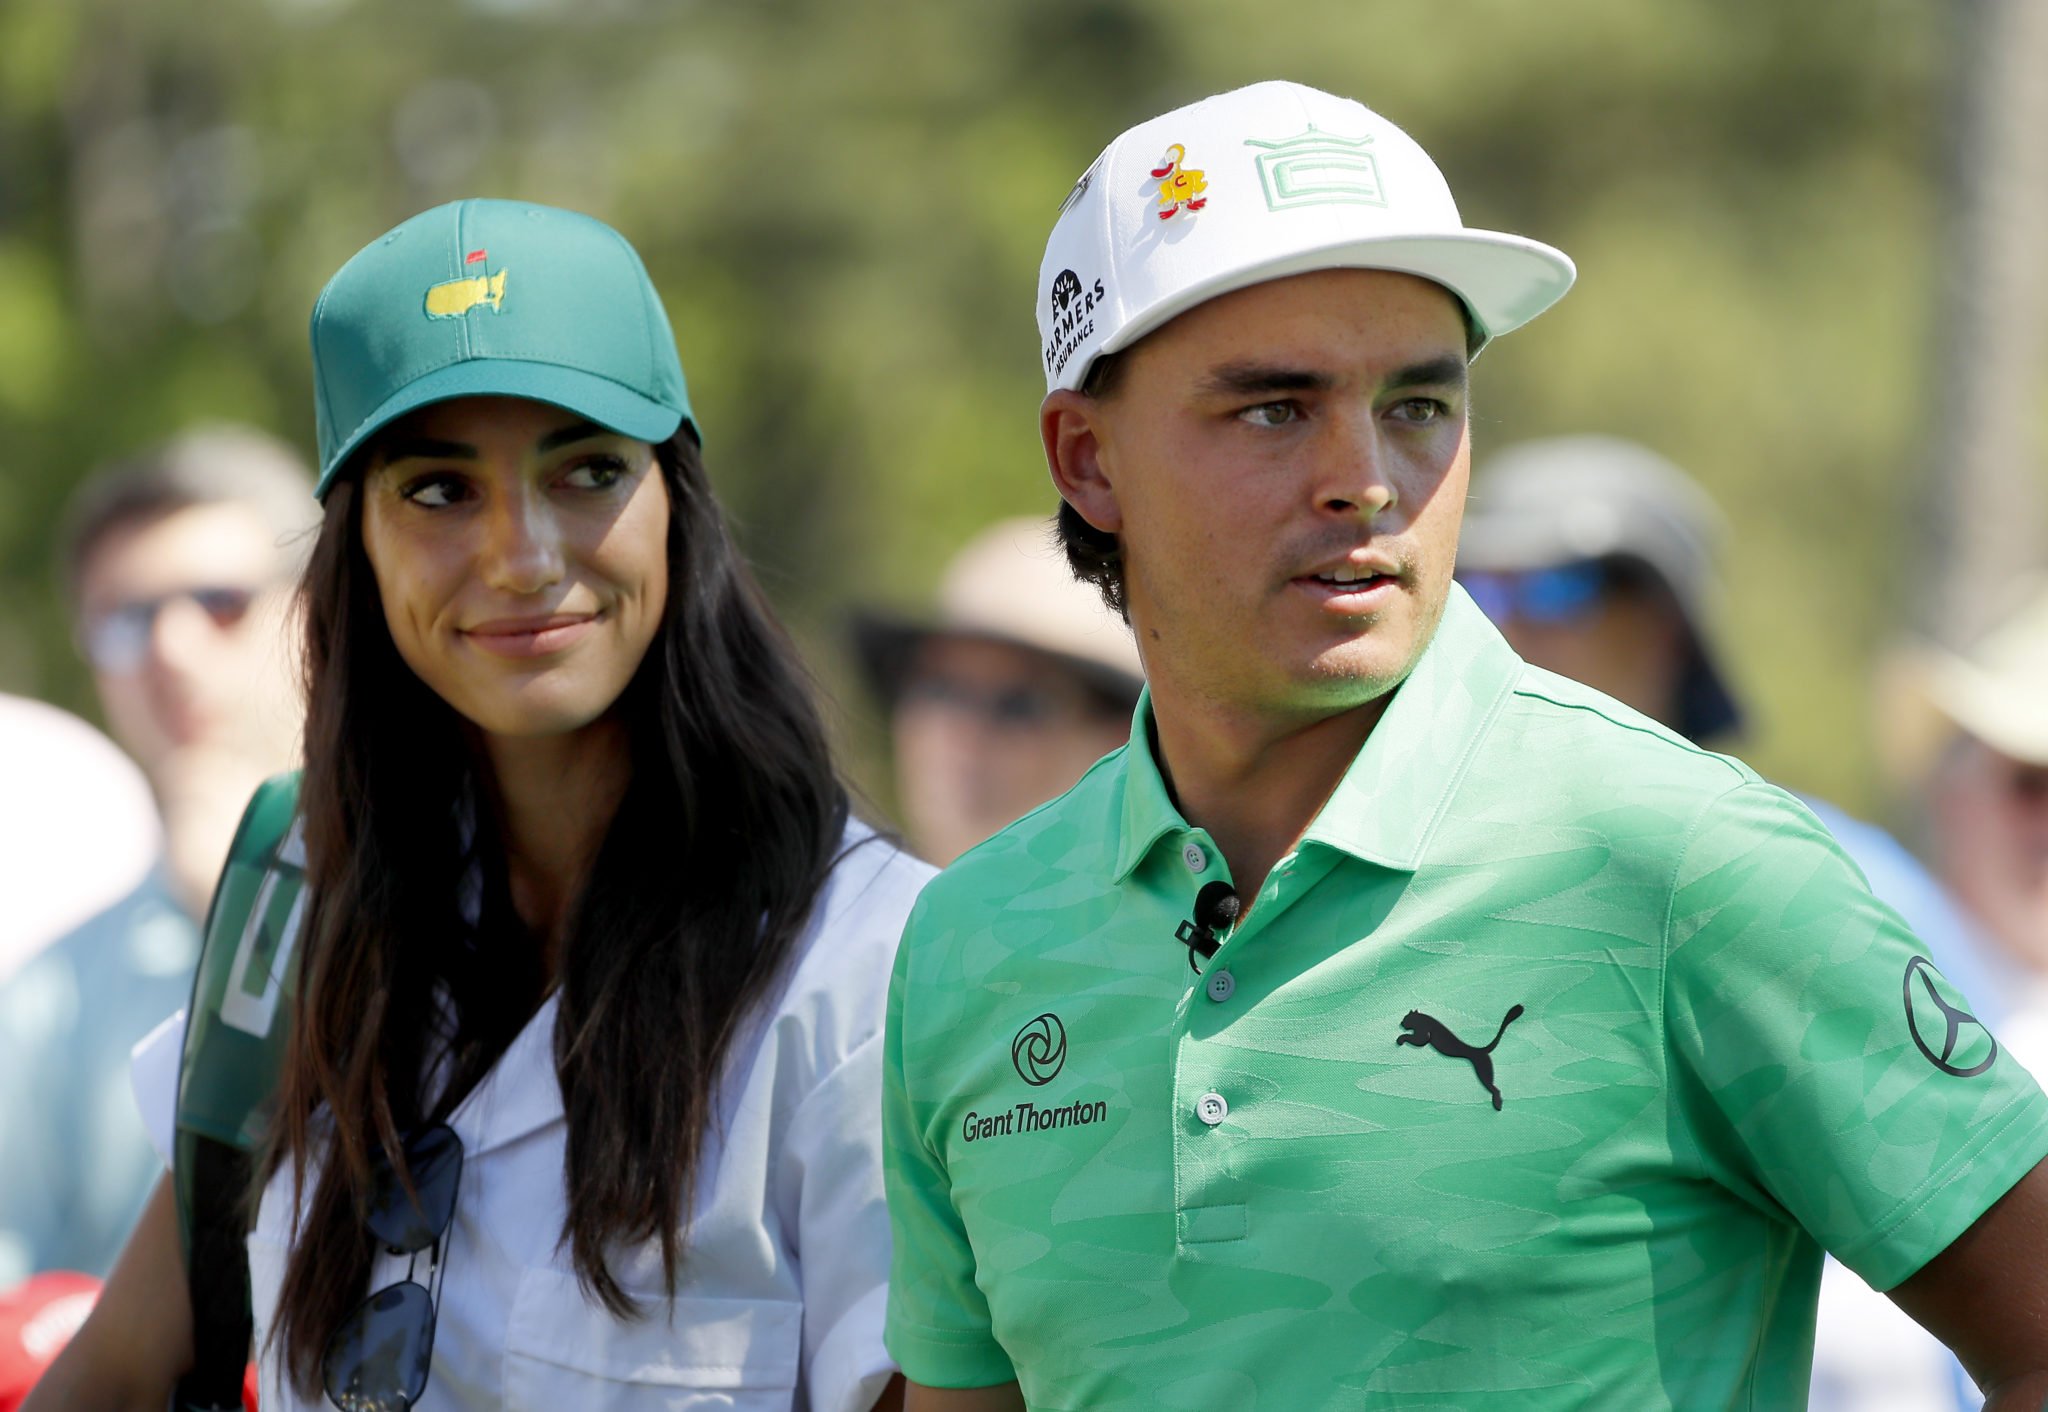 Rickie Fowler is OUT of the 2022 Masters Tournament